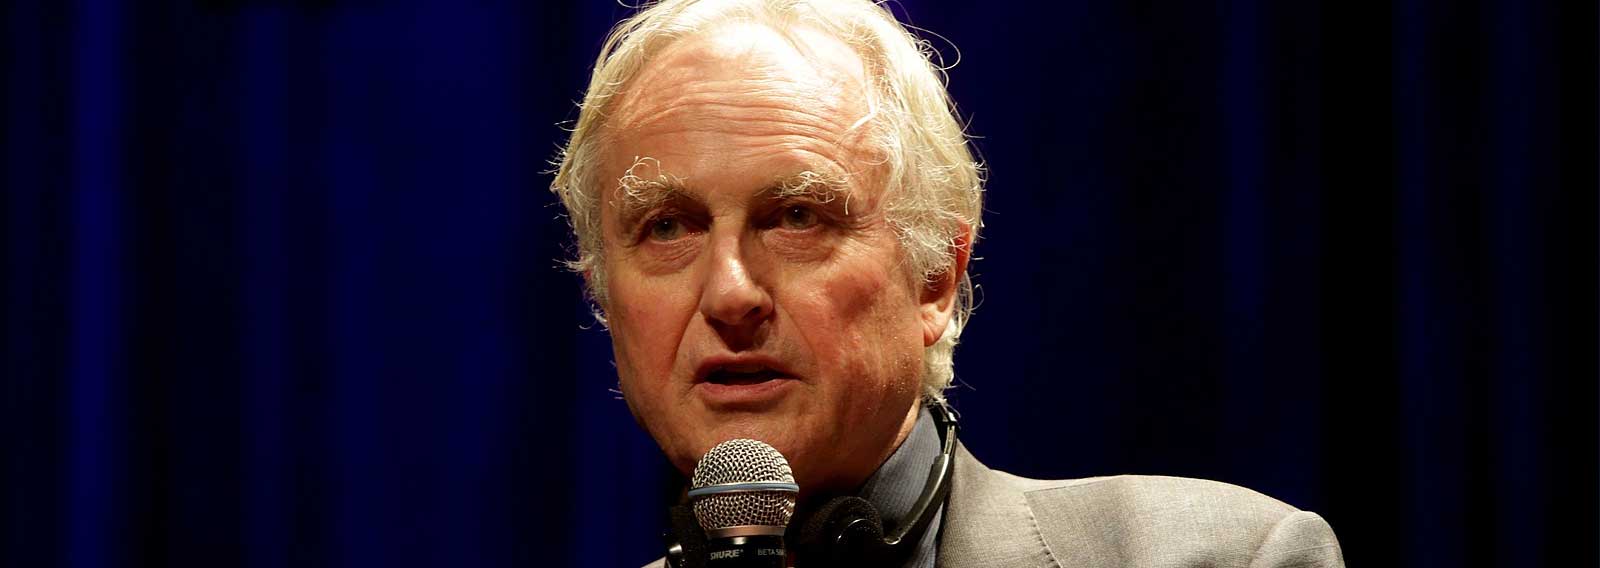 Even Dawkins Can See the Cultural Value of Christianity